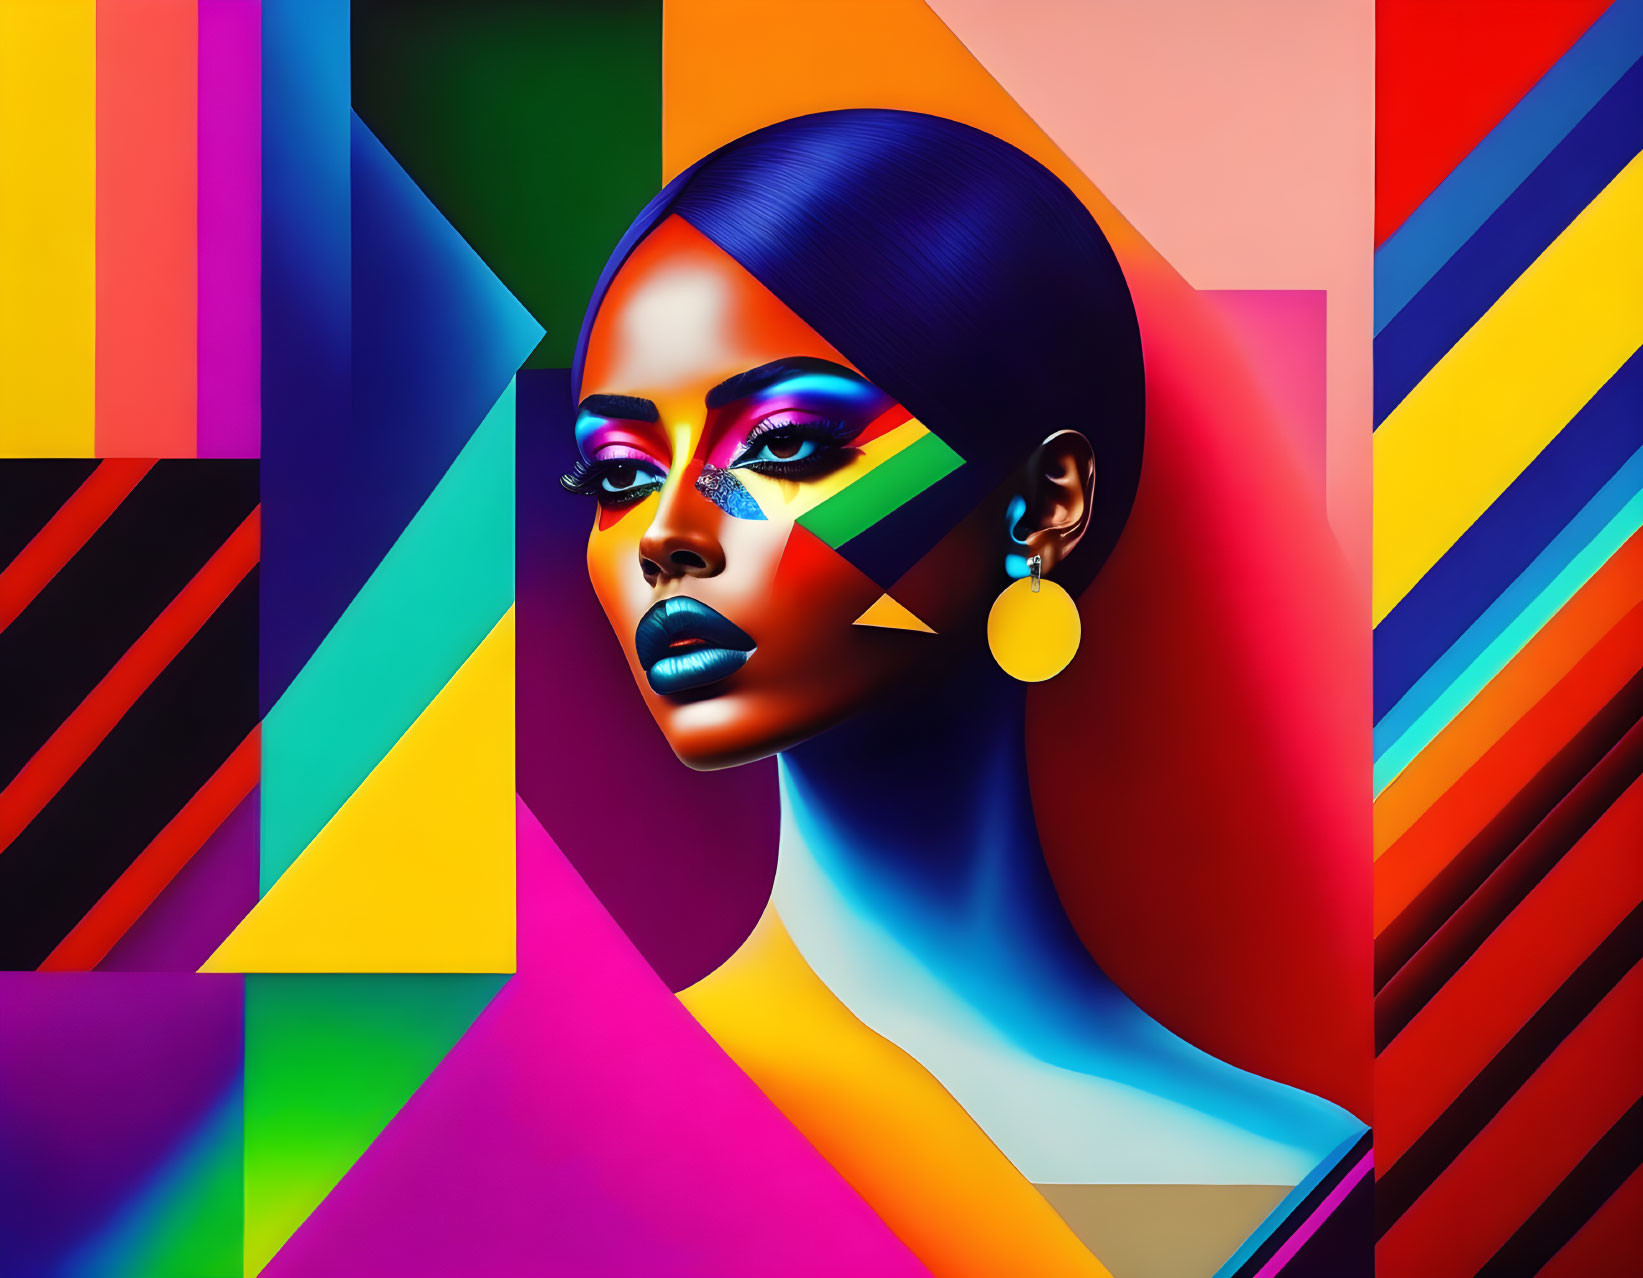 Colorful digital art featuring woman with striking makeup